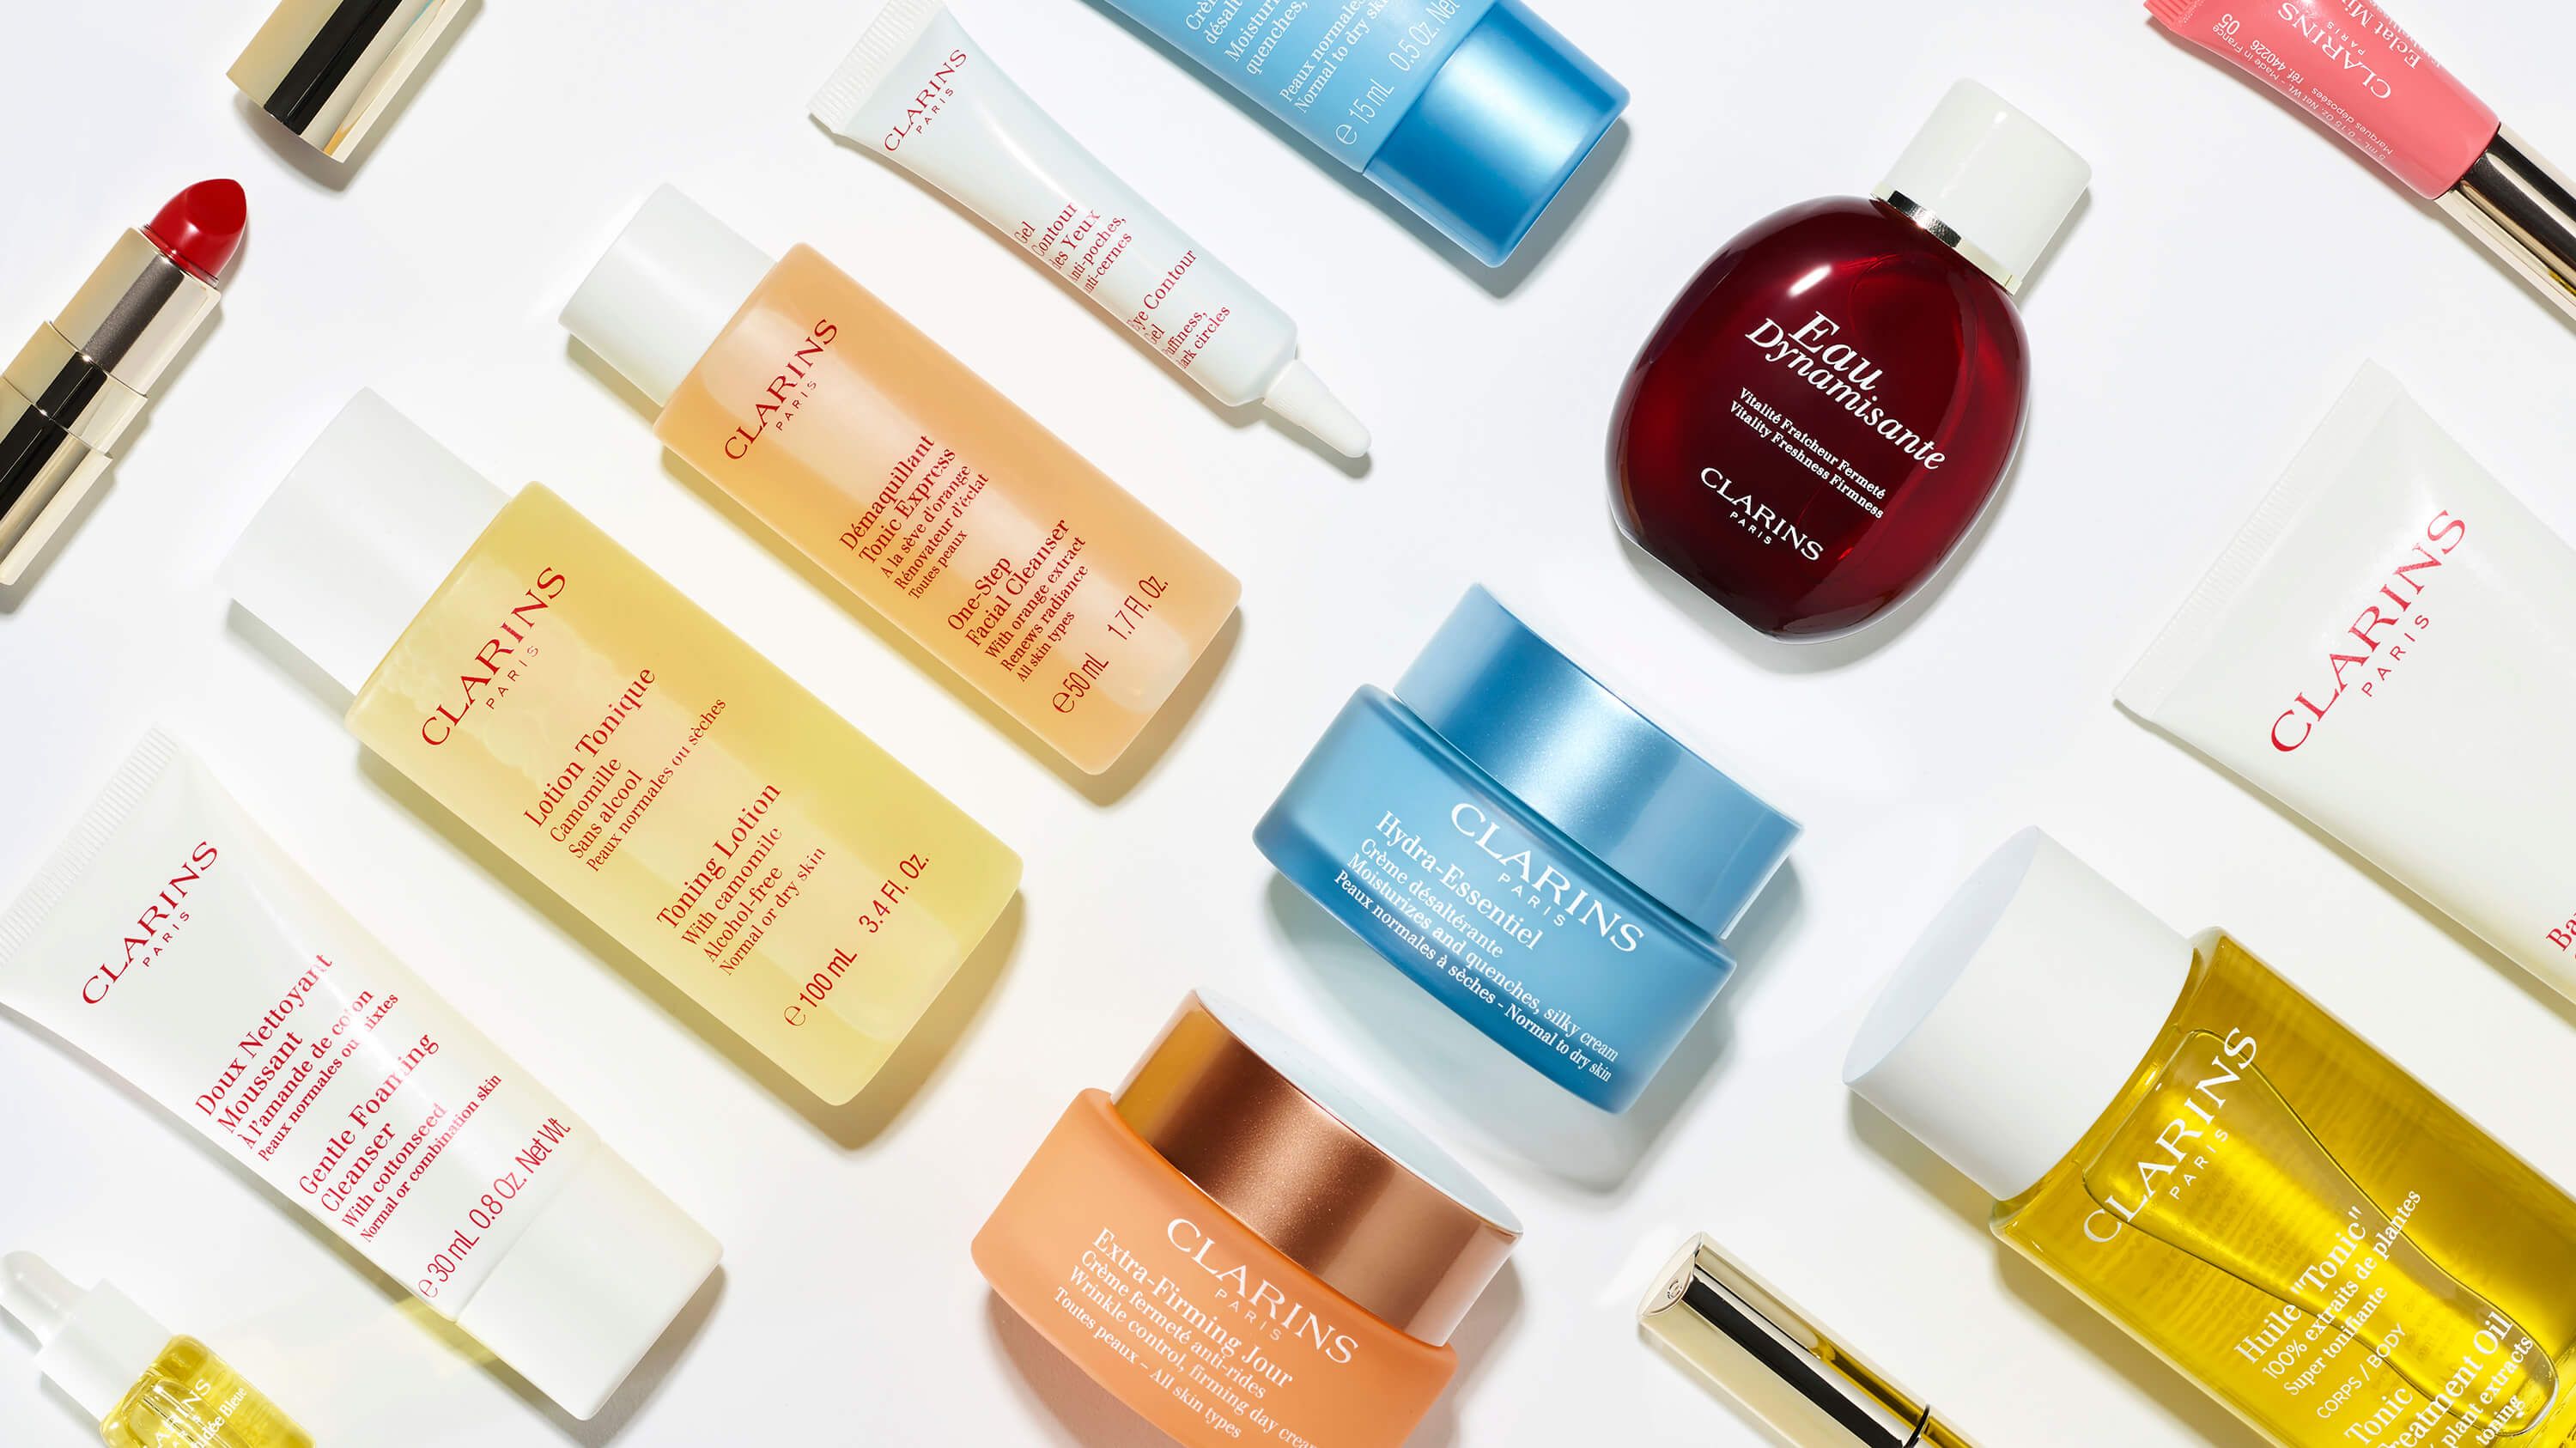 Clarins — Unlimited - Brand Content